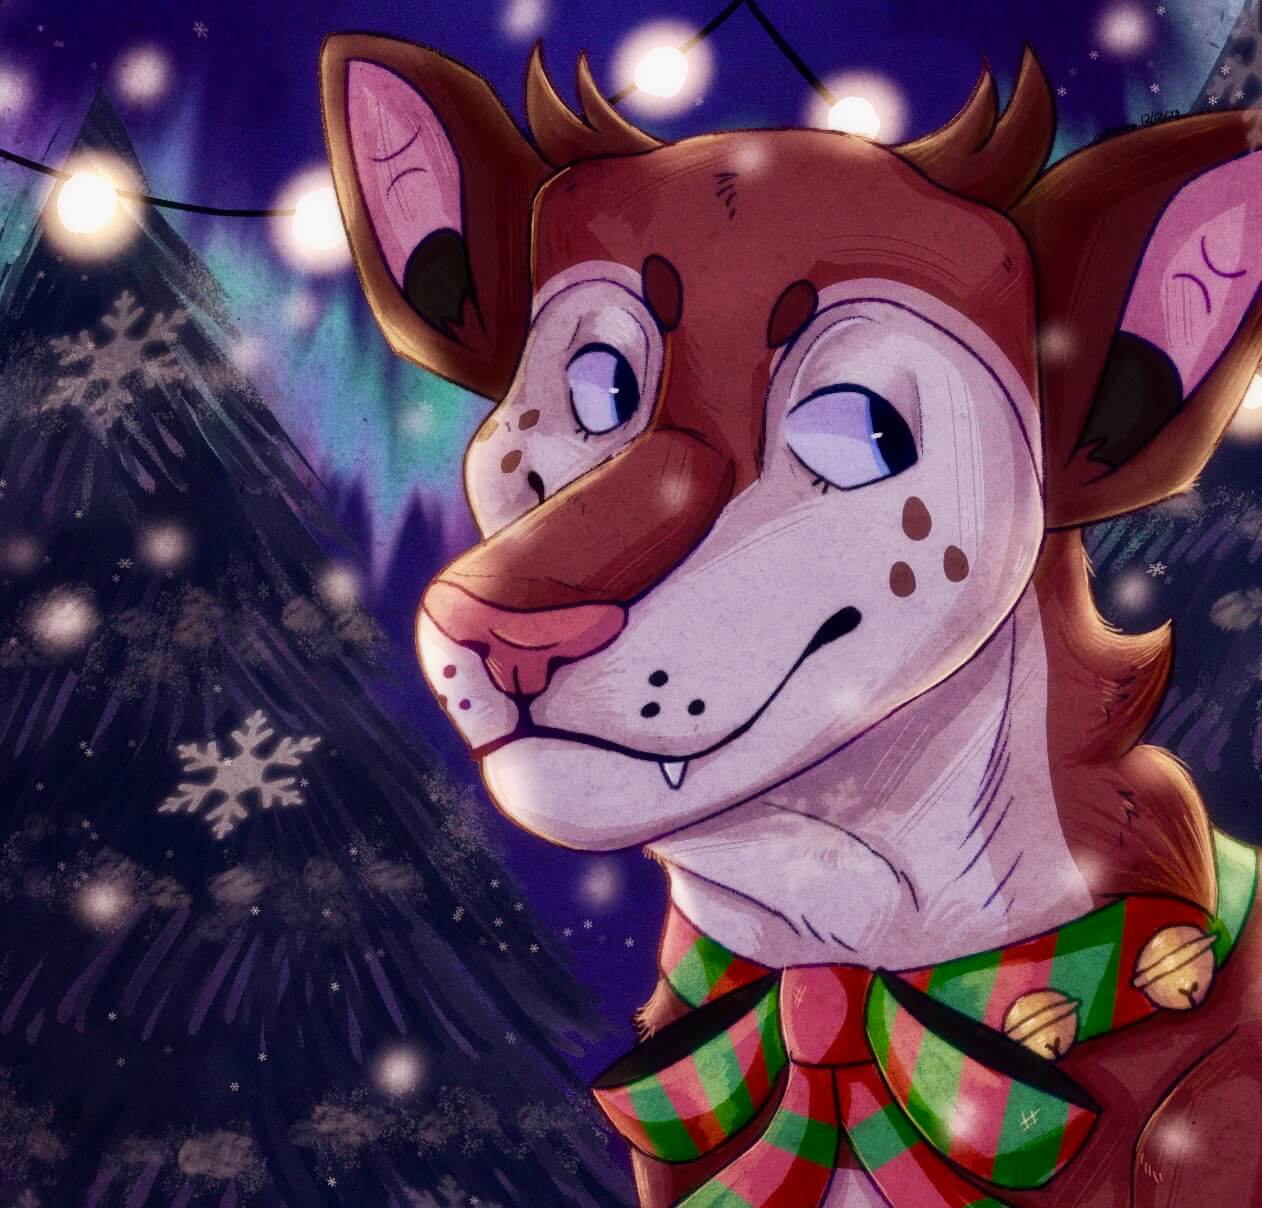 a 3/4th drawing of a brown and cream colored animal infront of a wintery background with trees at night as it begins to snow